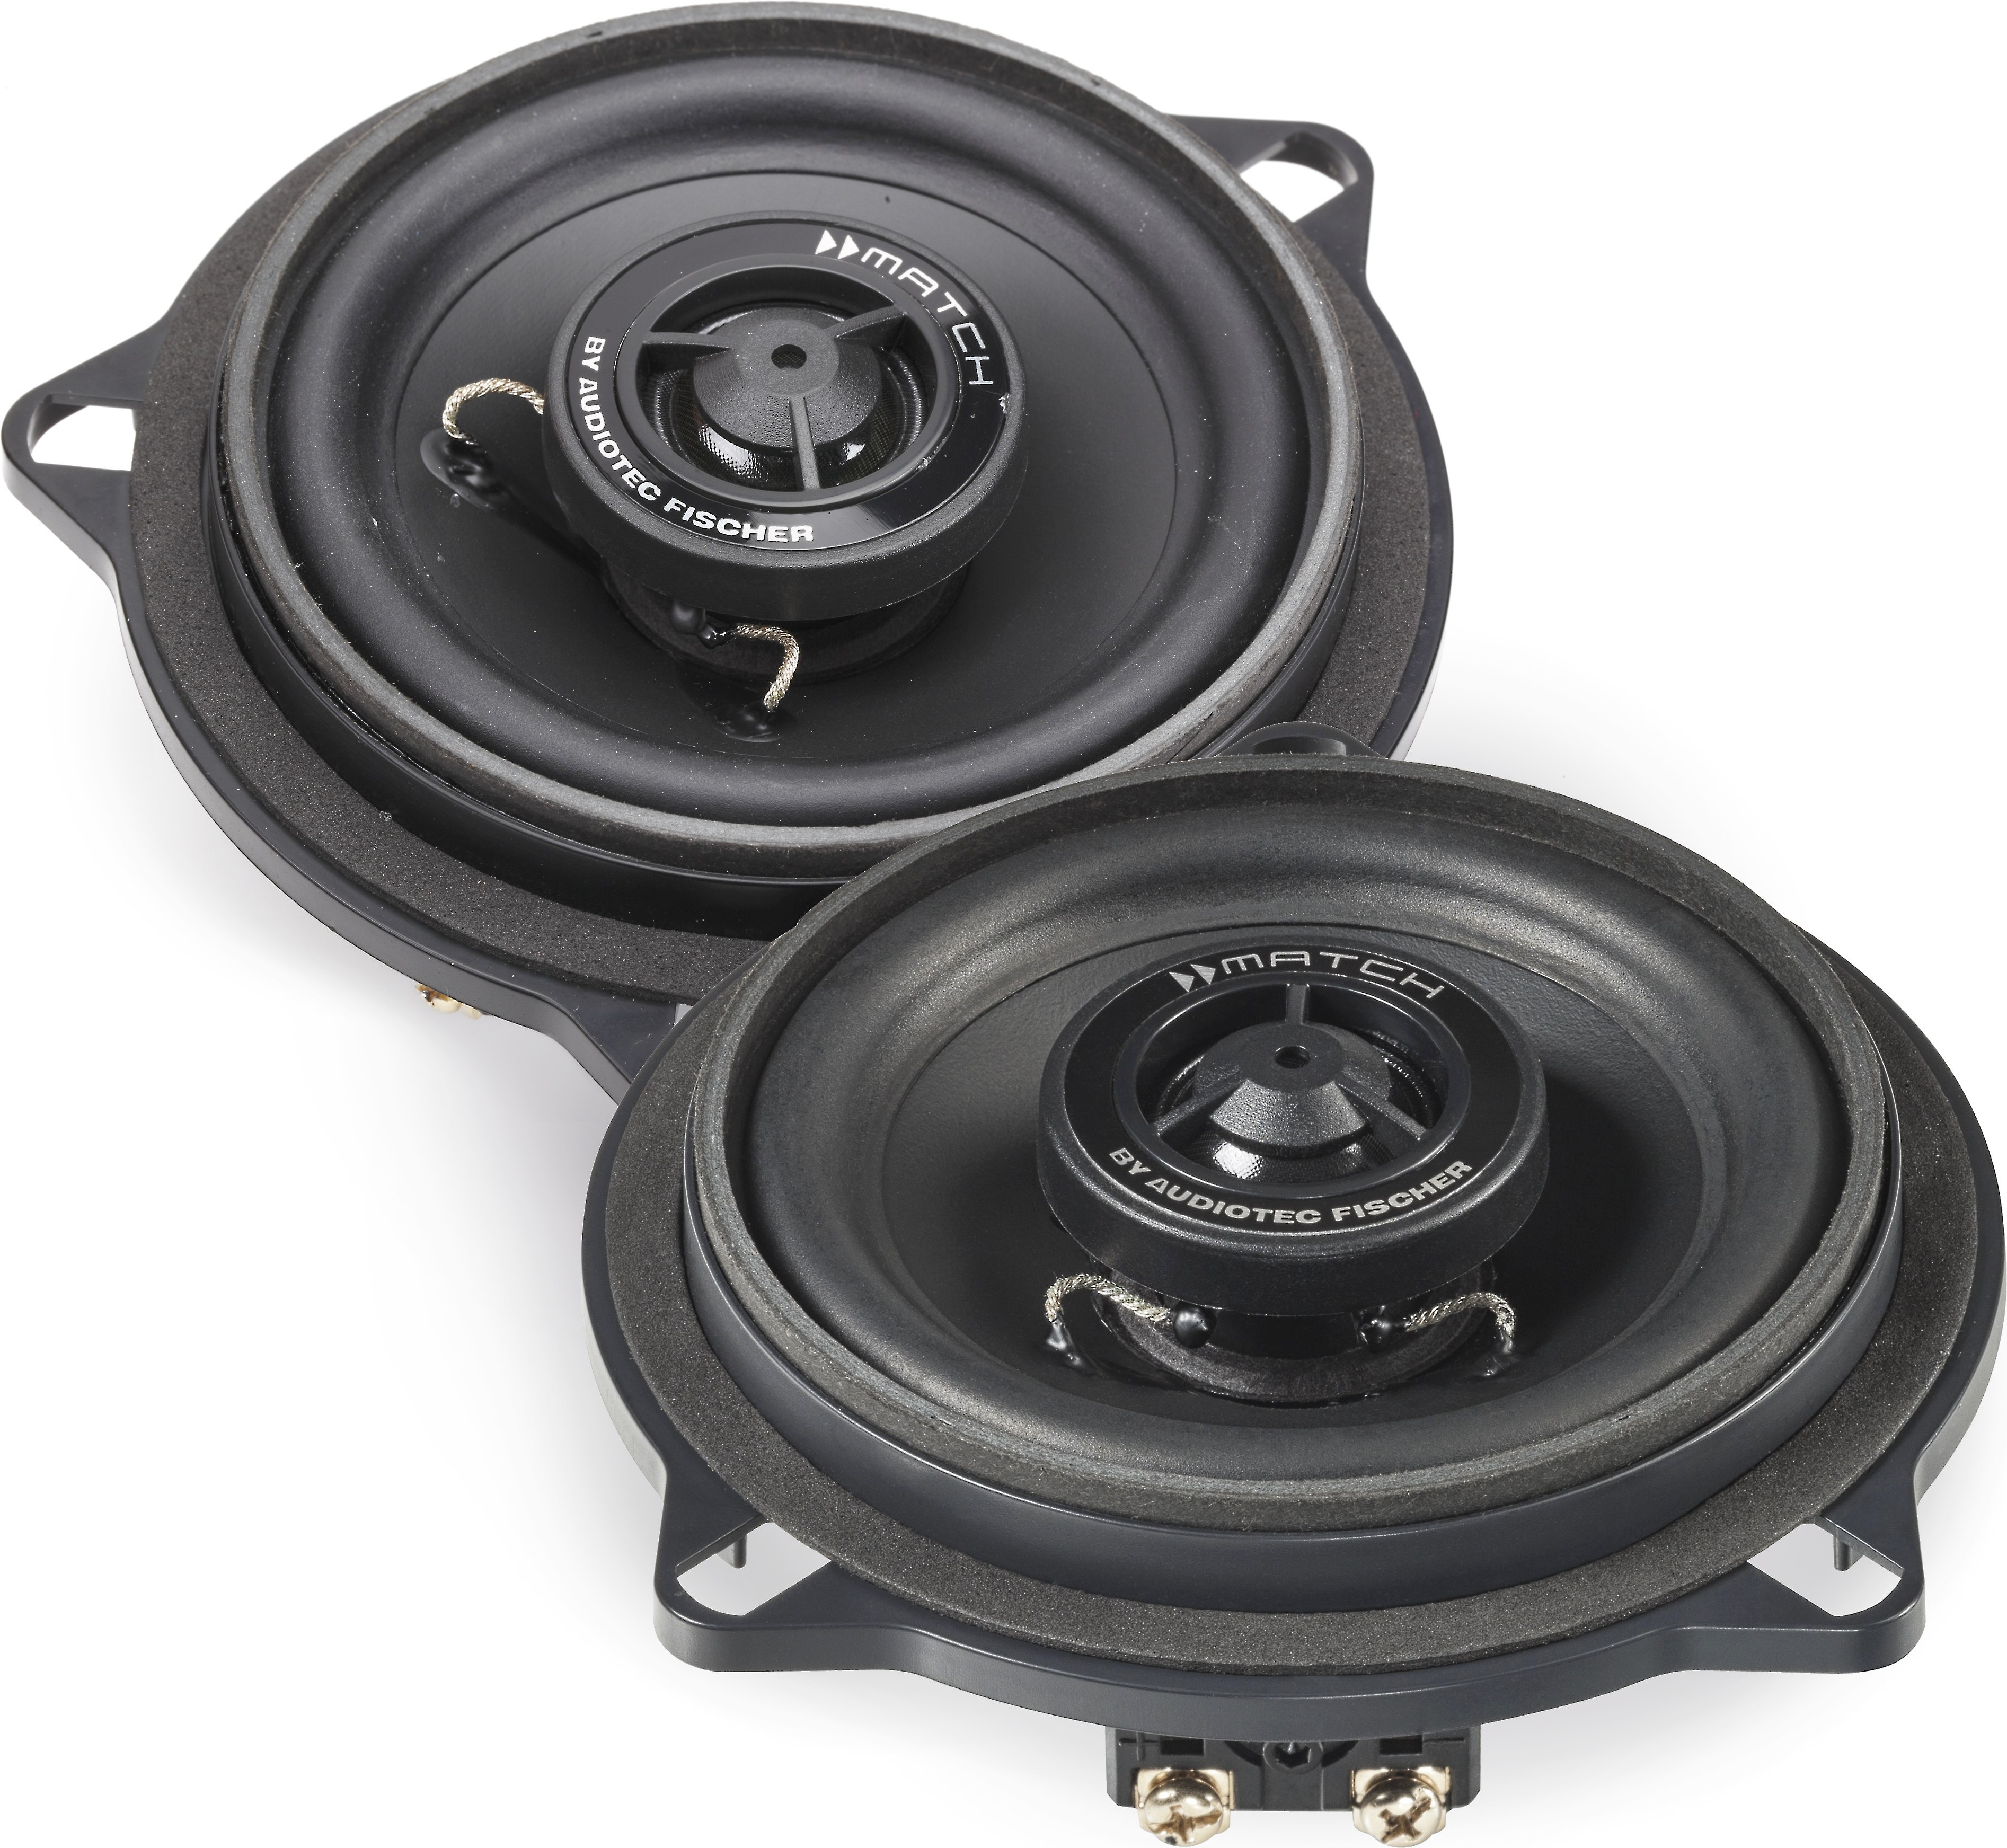 Customer MATCH MS 4X-BMW.1 coaxial speakers designed for BMW models Crutchfield